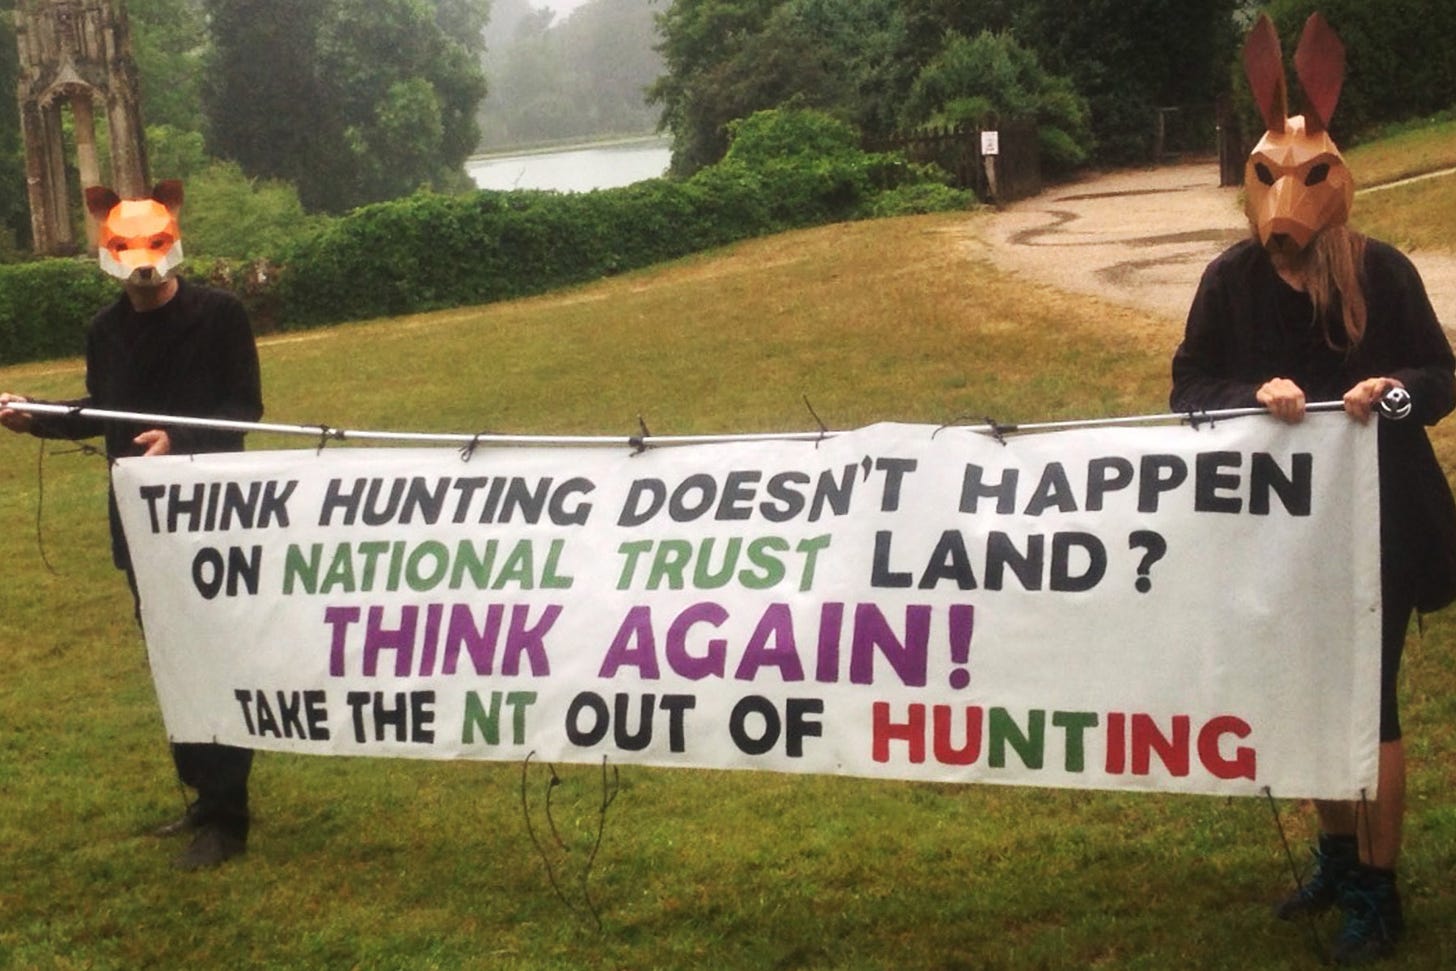 Protesters hold banner saying "Take the NT out of hunting".